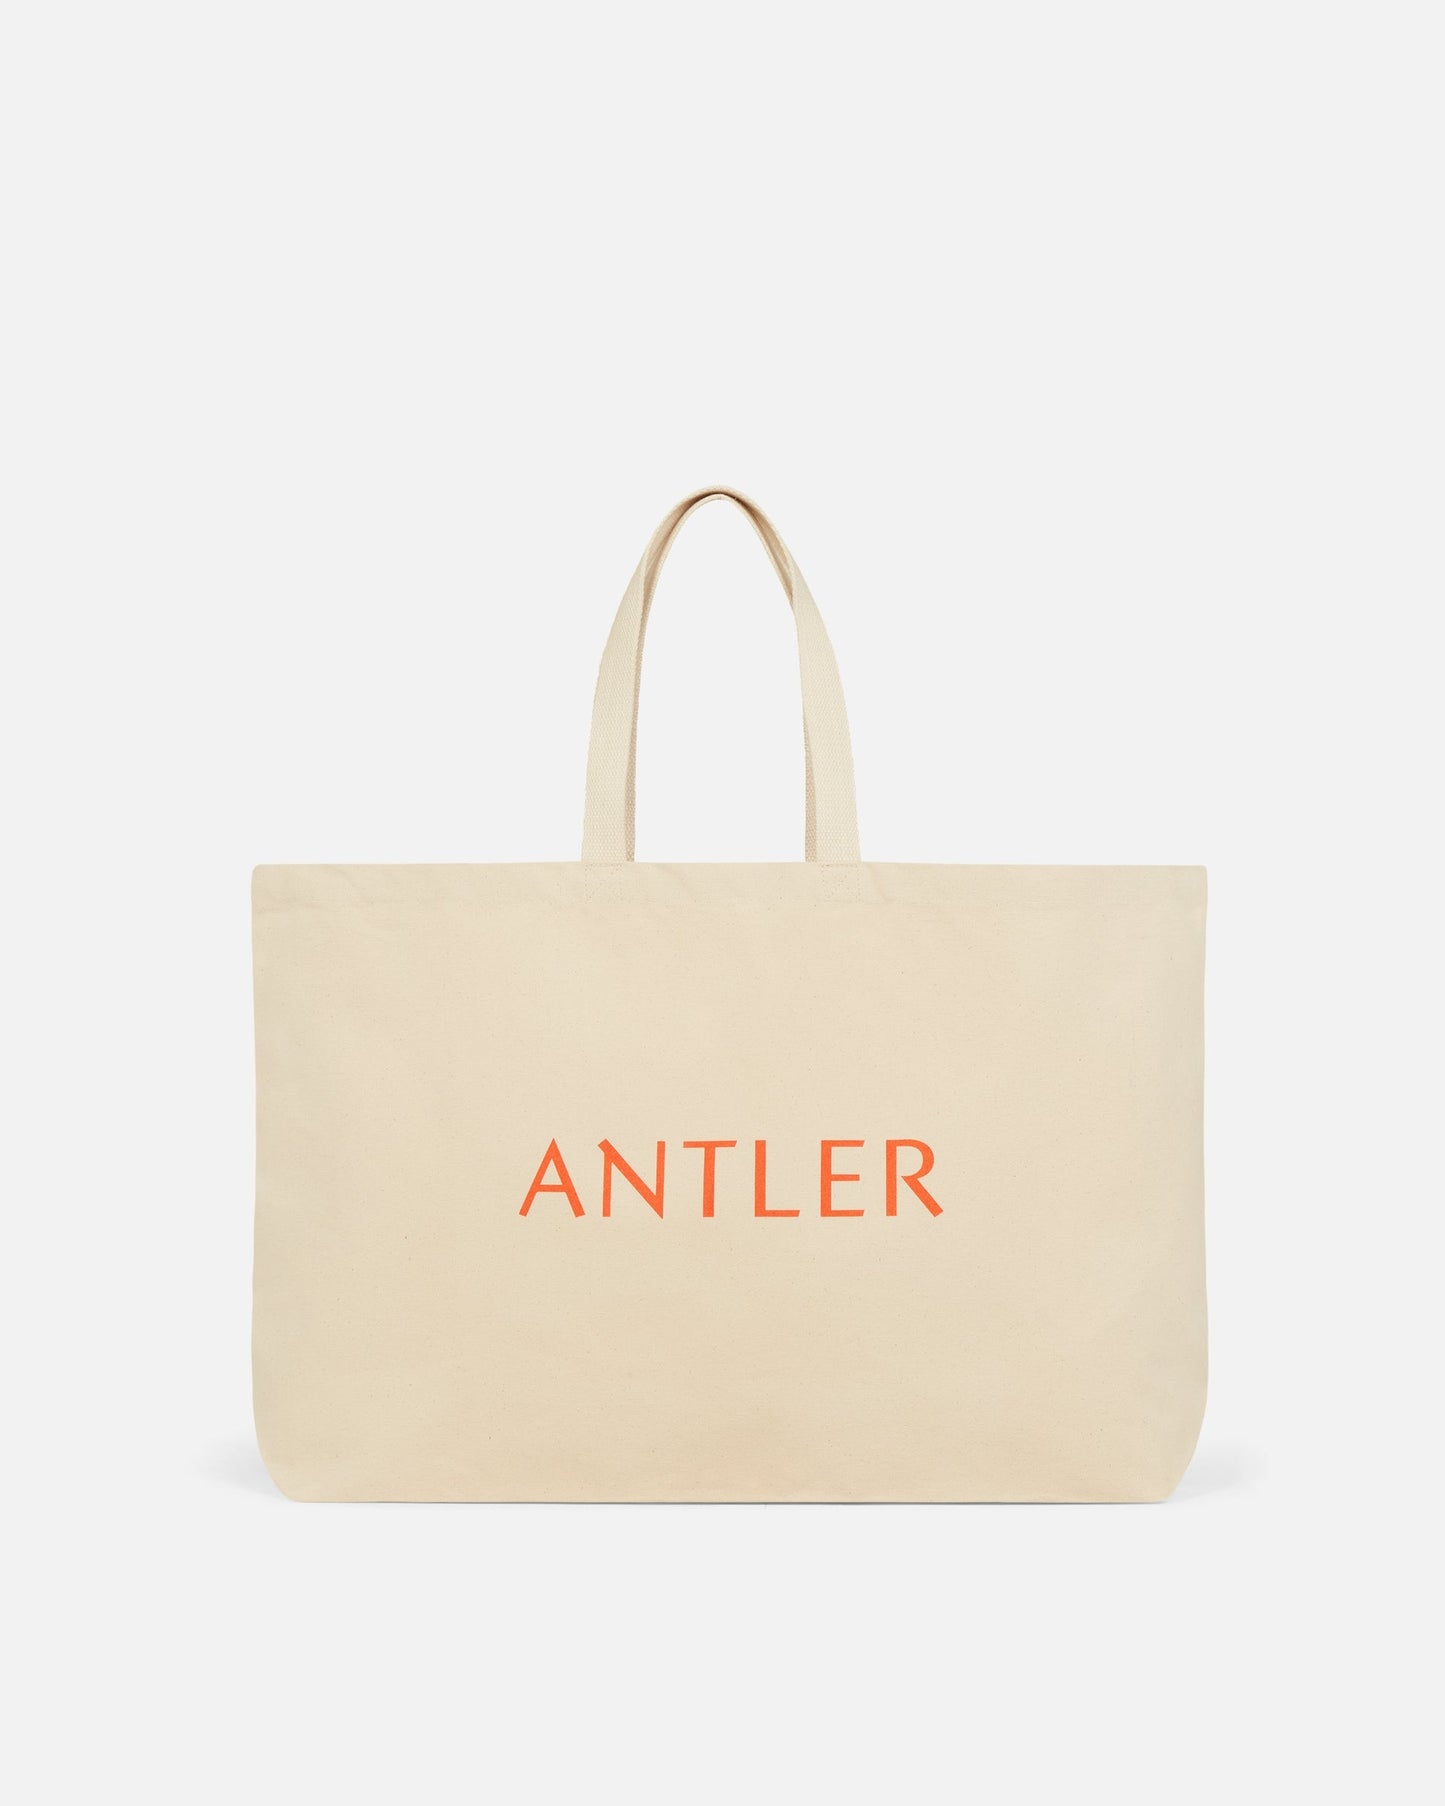 Antler Luggage -  Oversized Tote Bag in White - Tote Bag